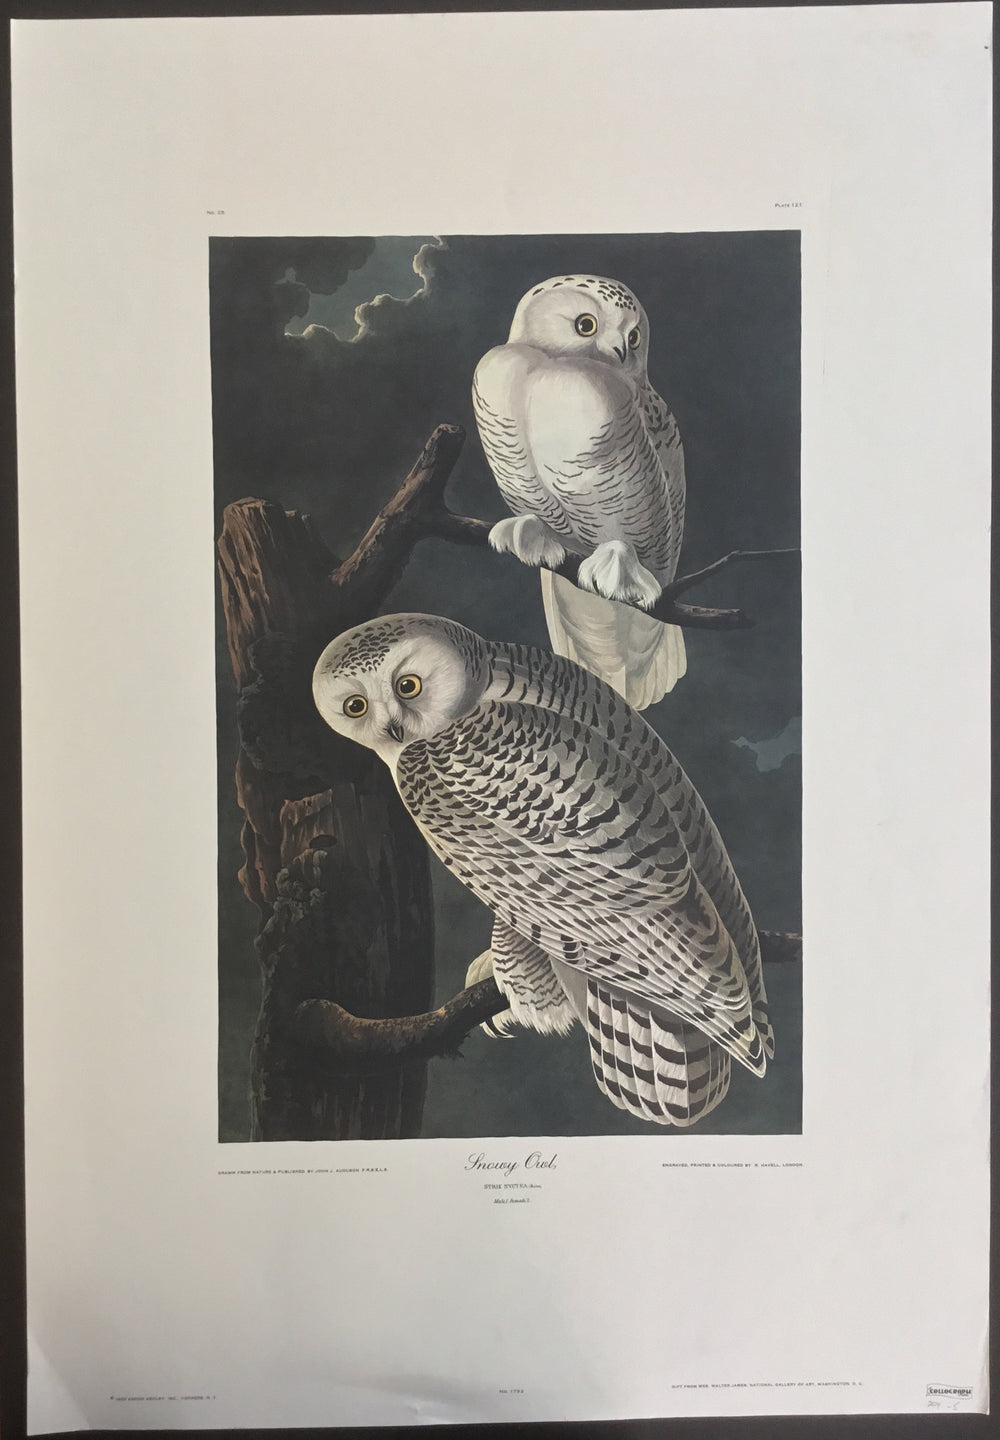 Special: Snowy Owl, Aaron Ashley Edition, 22 3/4 x 33 inches